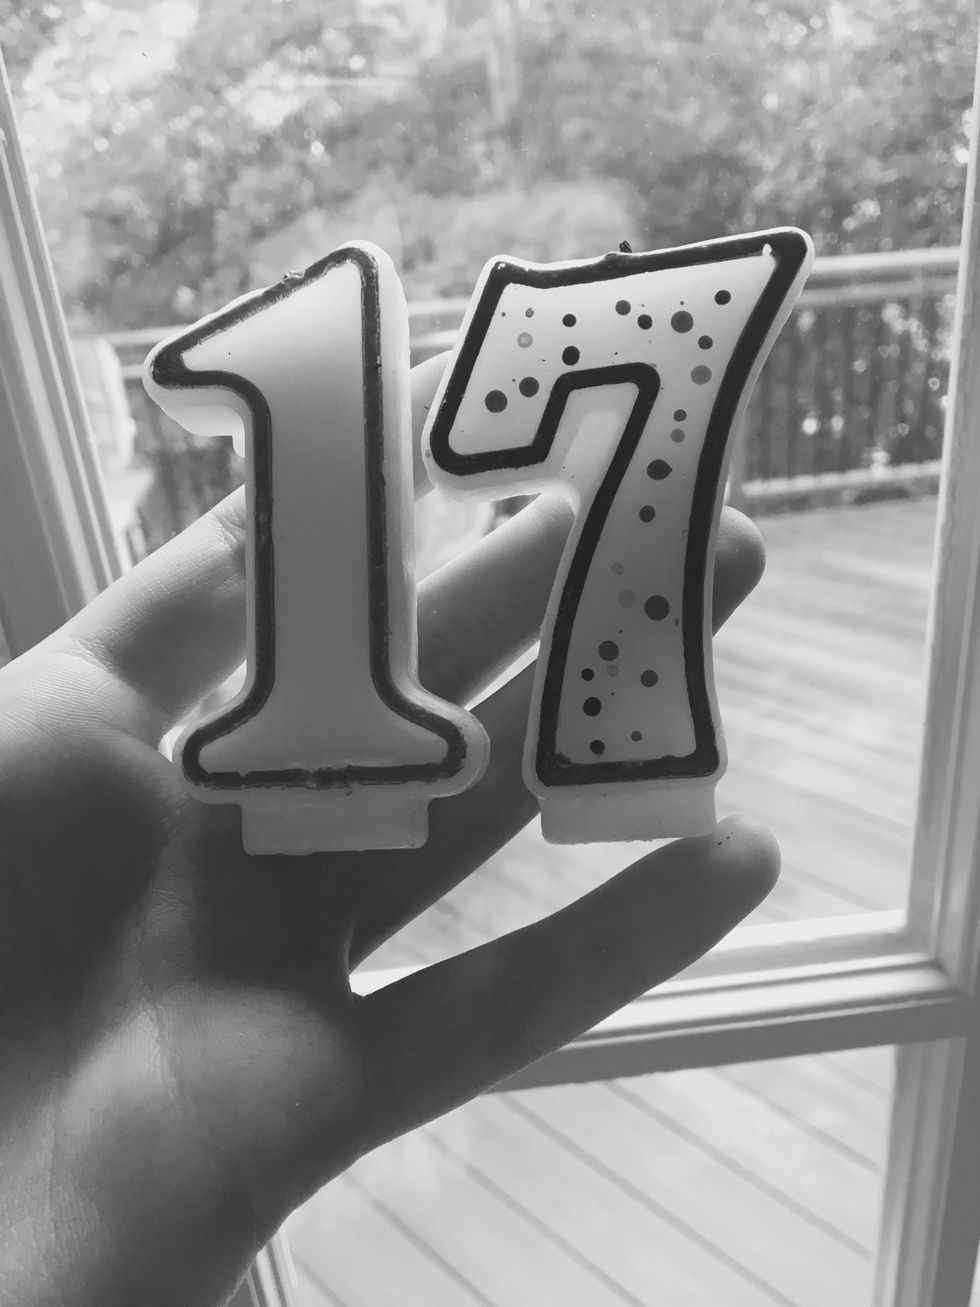 Turning 17: That Insignificant Age Between 16 And 18